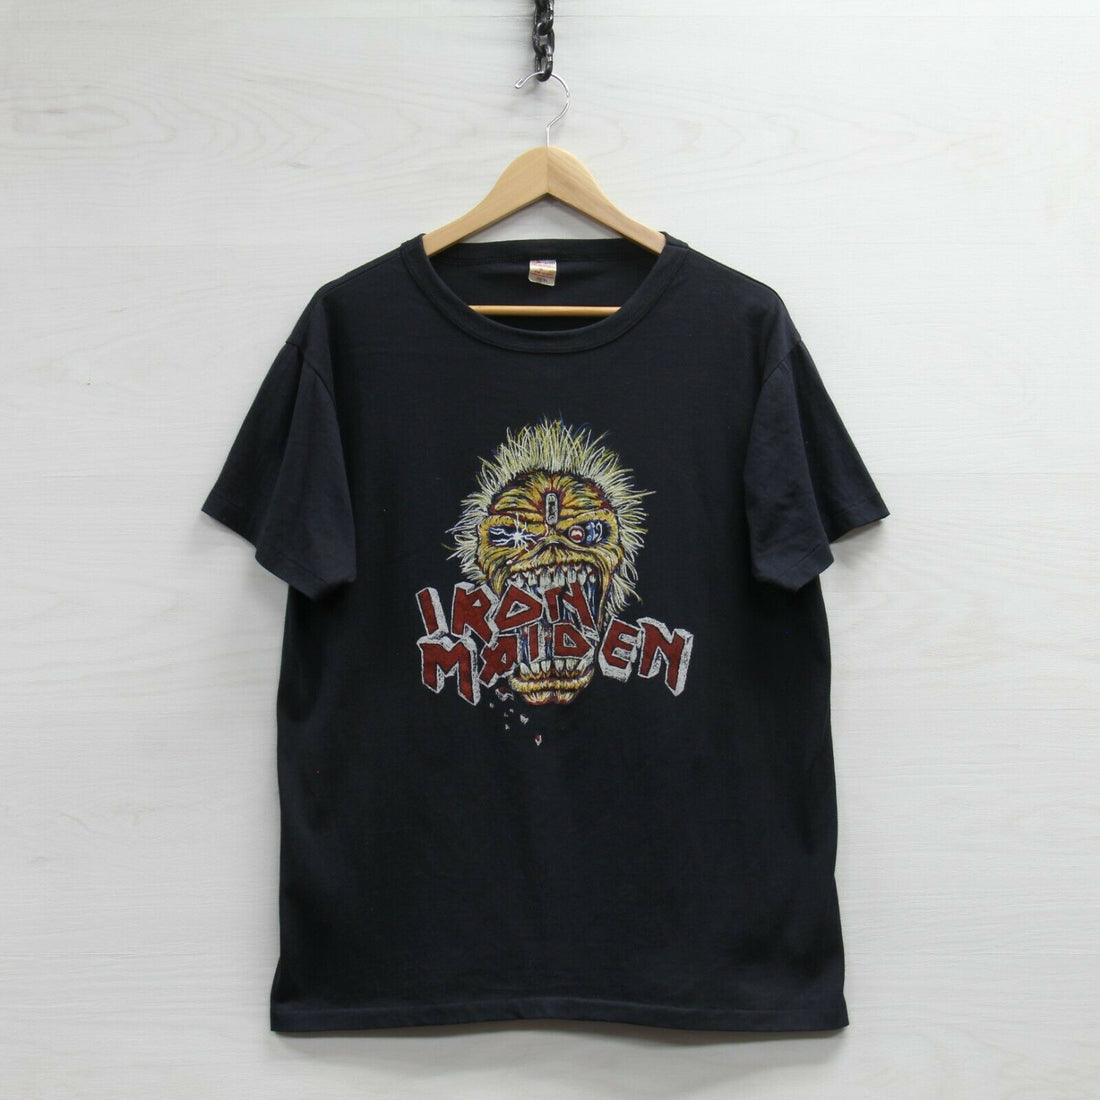 Vintage Iron Maiden T-Shirt Size XL Black 80s 90s Heavy Metal Made Canada